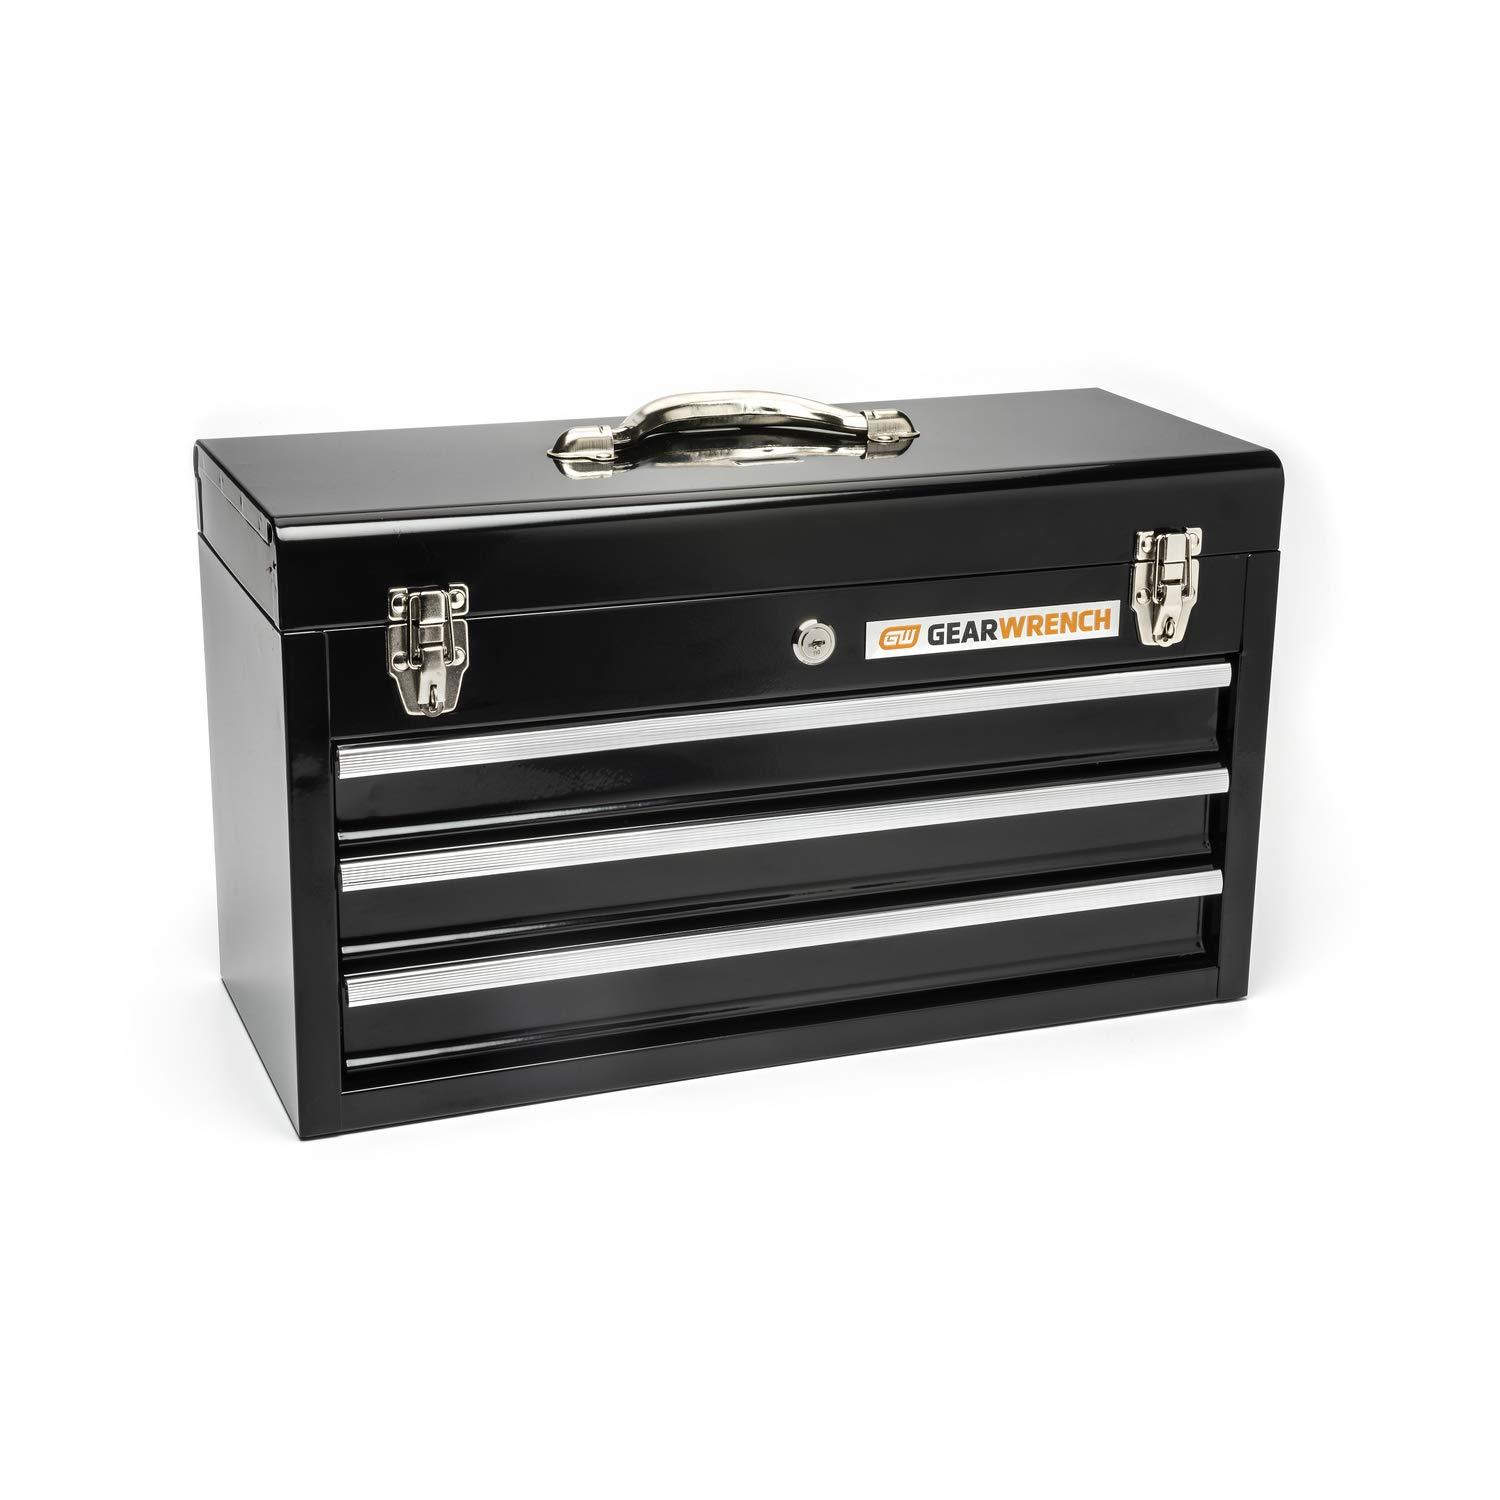 GEARWRENCH 20" 3 Drawer Steel Tool Box - $118.74